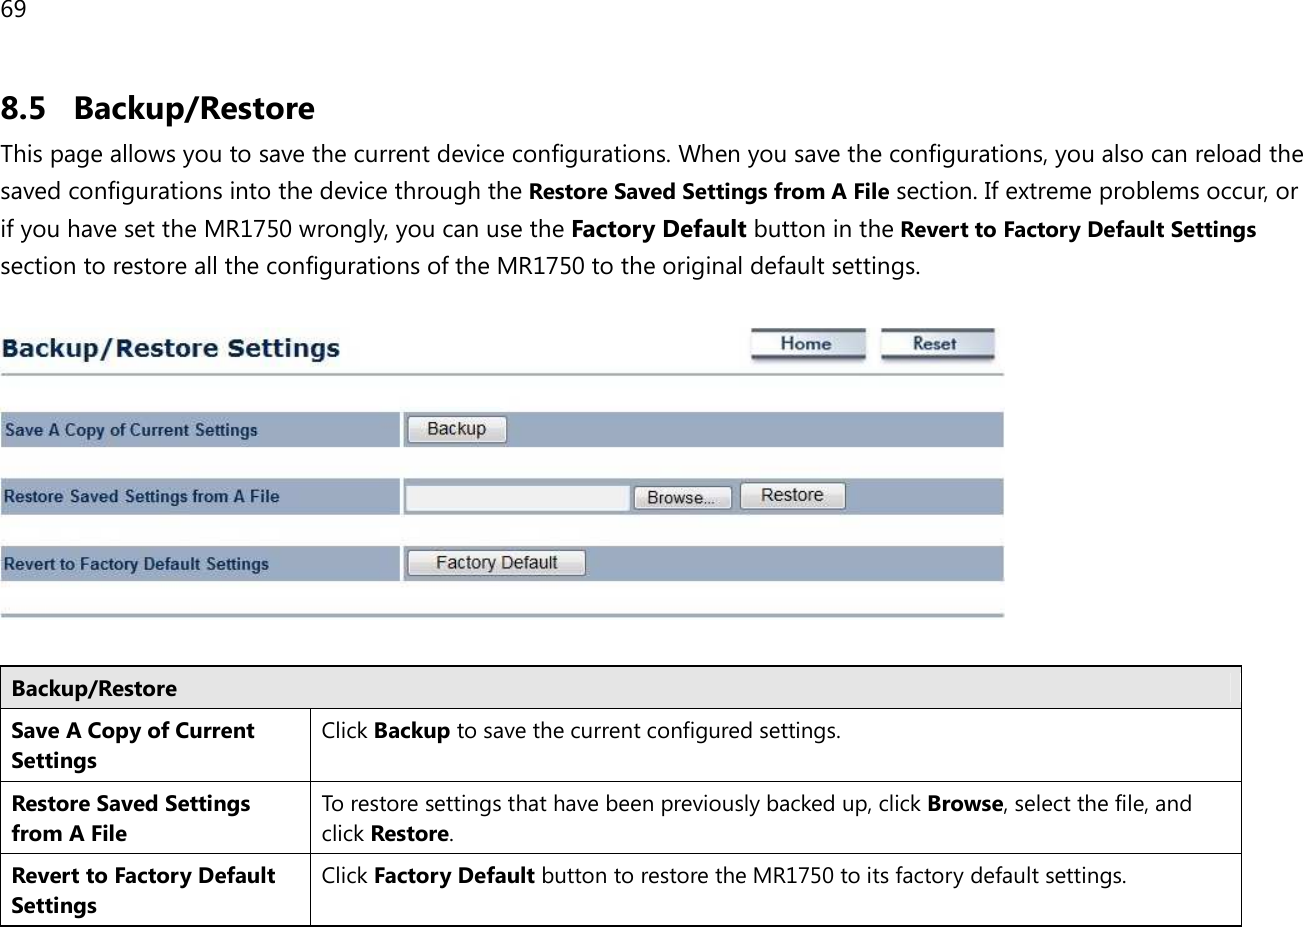 69  8.5 Backup/Restore This page allows you to save the current device configurations. When you save the configurations, you also can reload the saved configurations into the device through the Restore Saved Settings from A File section. If extreme problems occur, or if you have set the MR1750 wrongly, you can use the Factory Default button in the Revert to Factory Default Settings section to restore all the configurations of the MR1750 to the original default settings.    Backup/Restore Save A Copy of Current Settings Click Backup to save the current configured settings. Restore Saved Settings from A File To restore settings that have been previously backed up, click Browse, select the file, and click Restore. Revert to Factory Default Settings Click Factory Default button to restore the MR1750 to its factory default settings.   